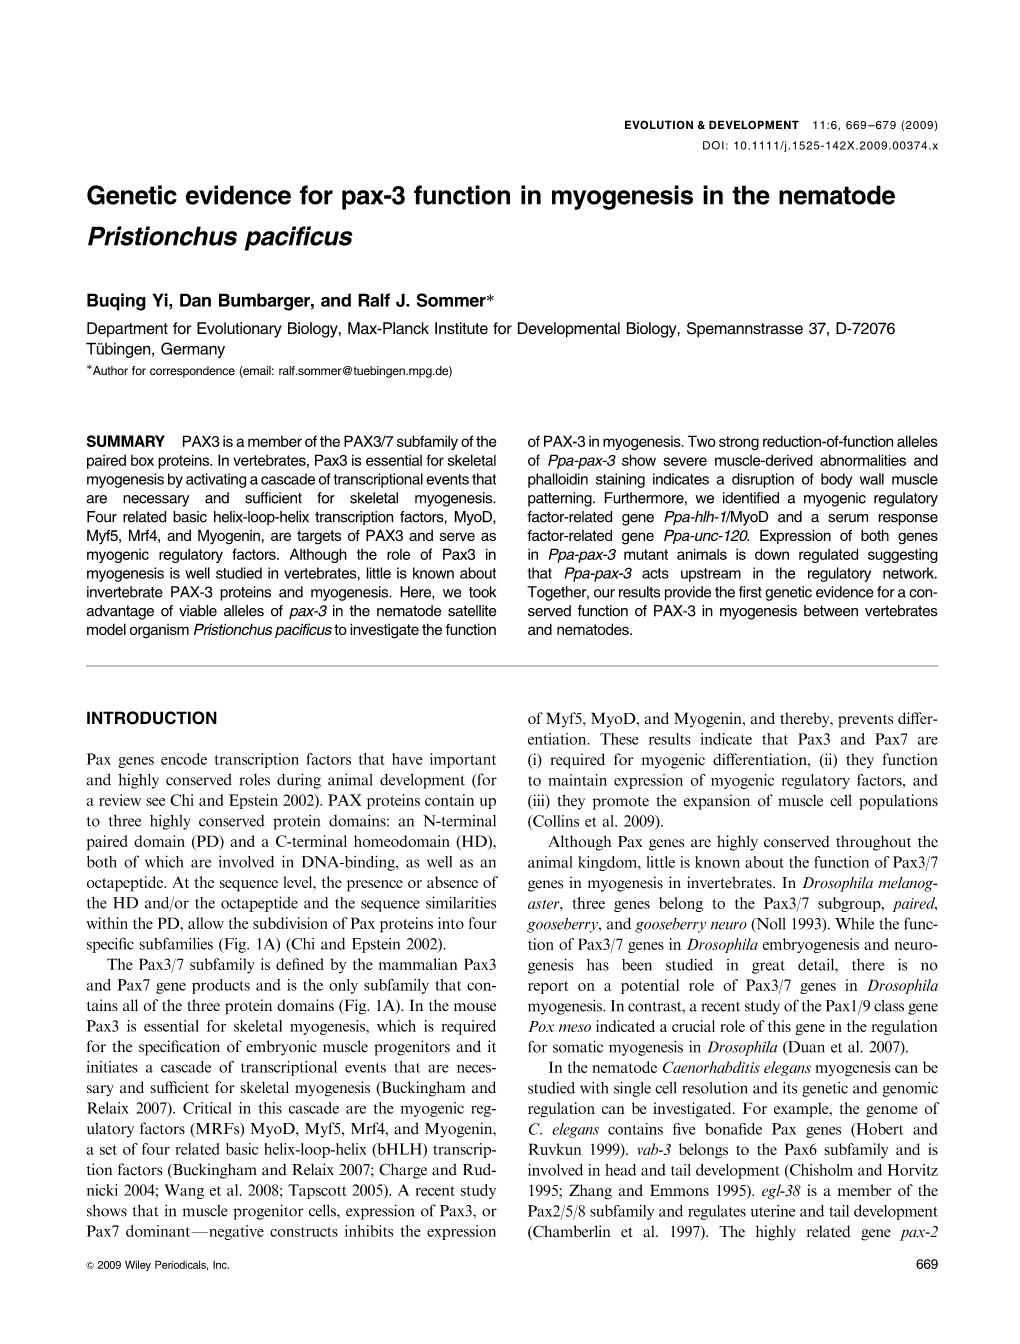 Genetic Evidence for Pax-3 Function in Myogenesis in the Nematode Pristionchus Pacificus